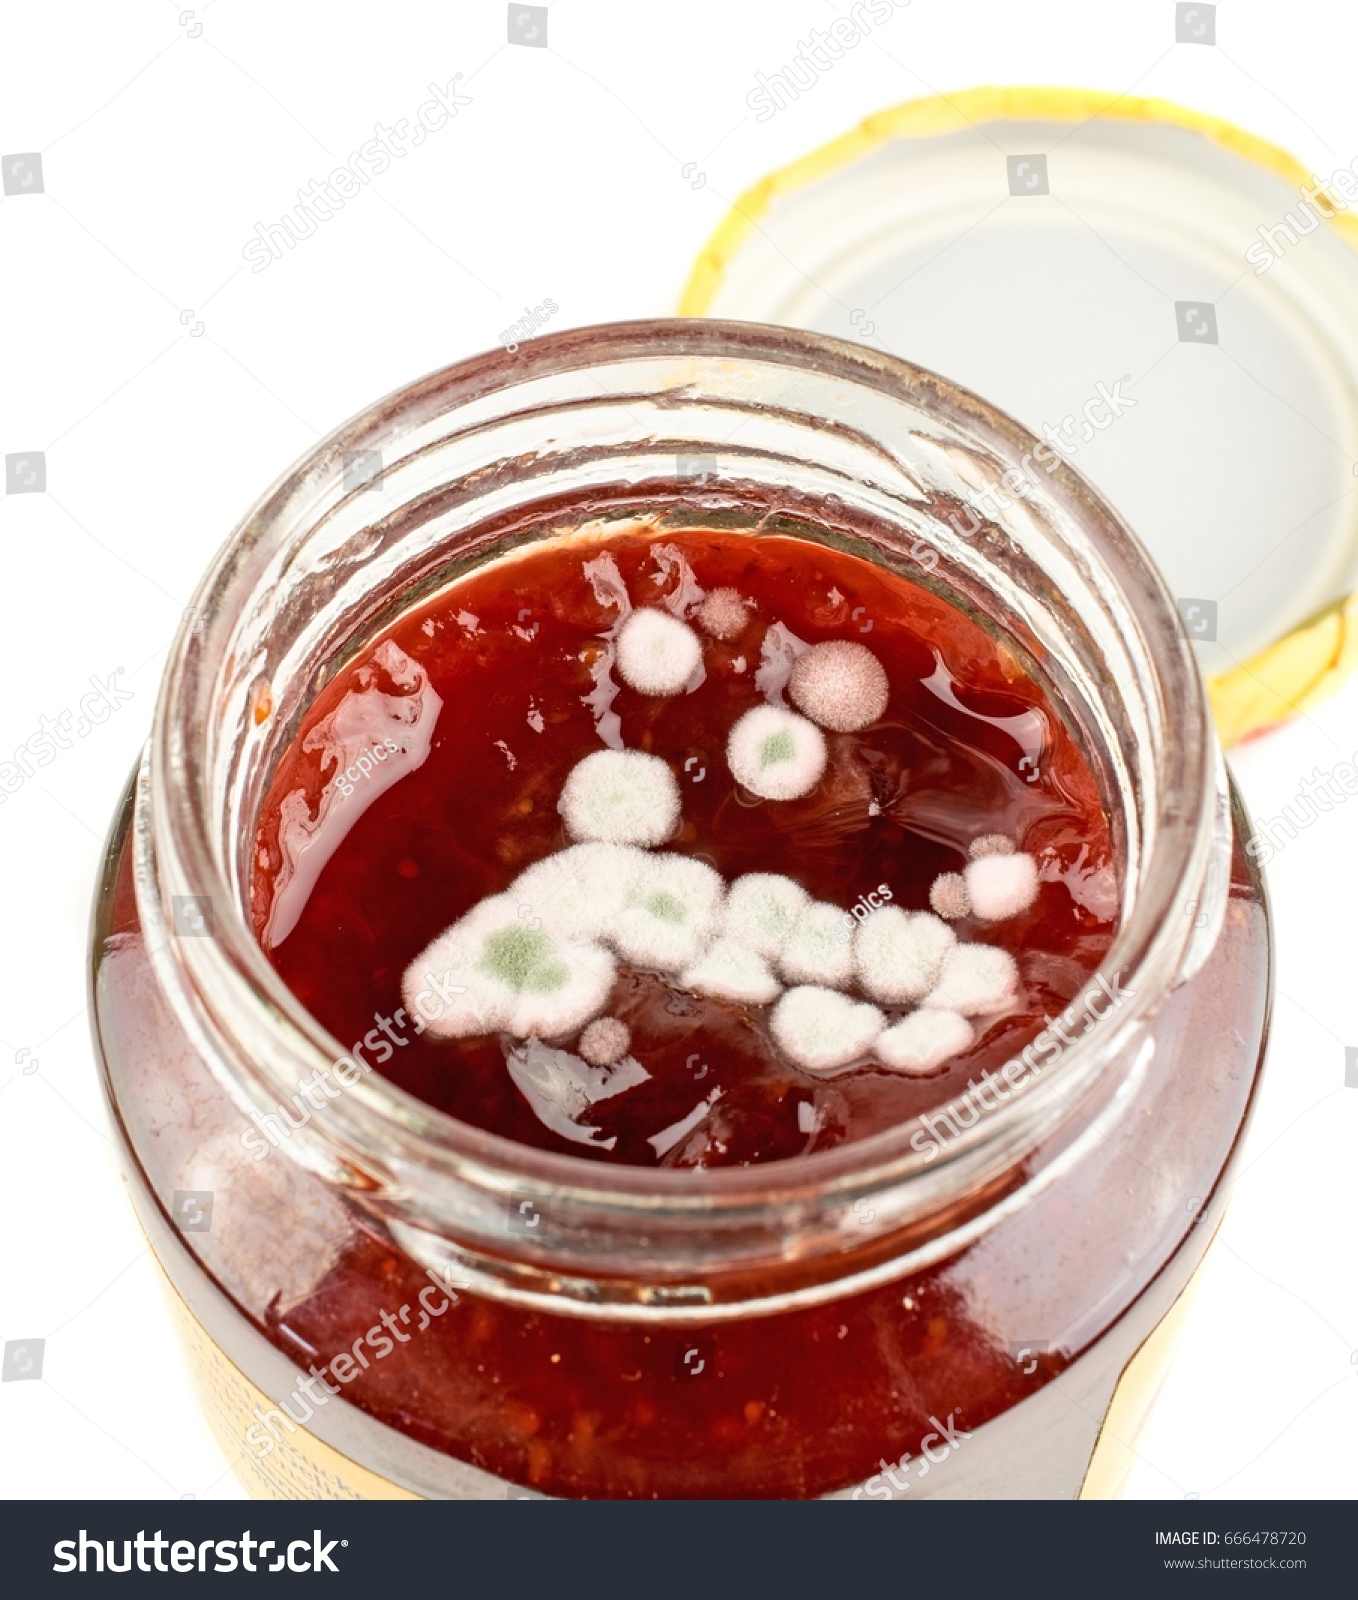 Download Open Jar Strawberry Jam Mould Growing Miscellaneous Stock Image 666478720 Yellowimages Mockups